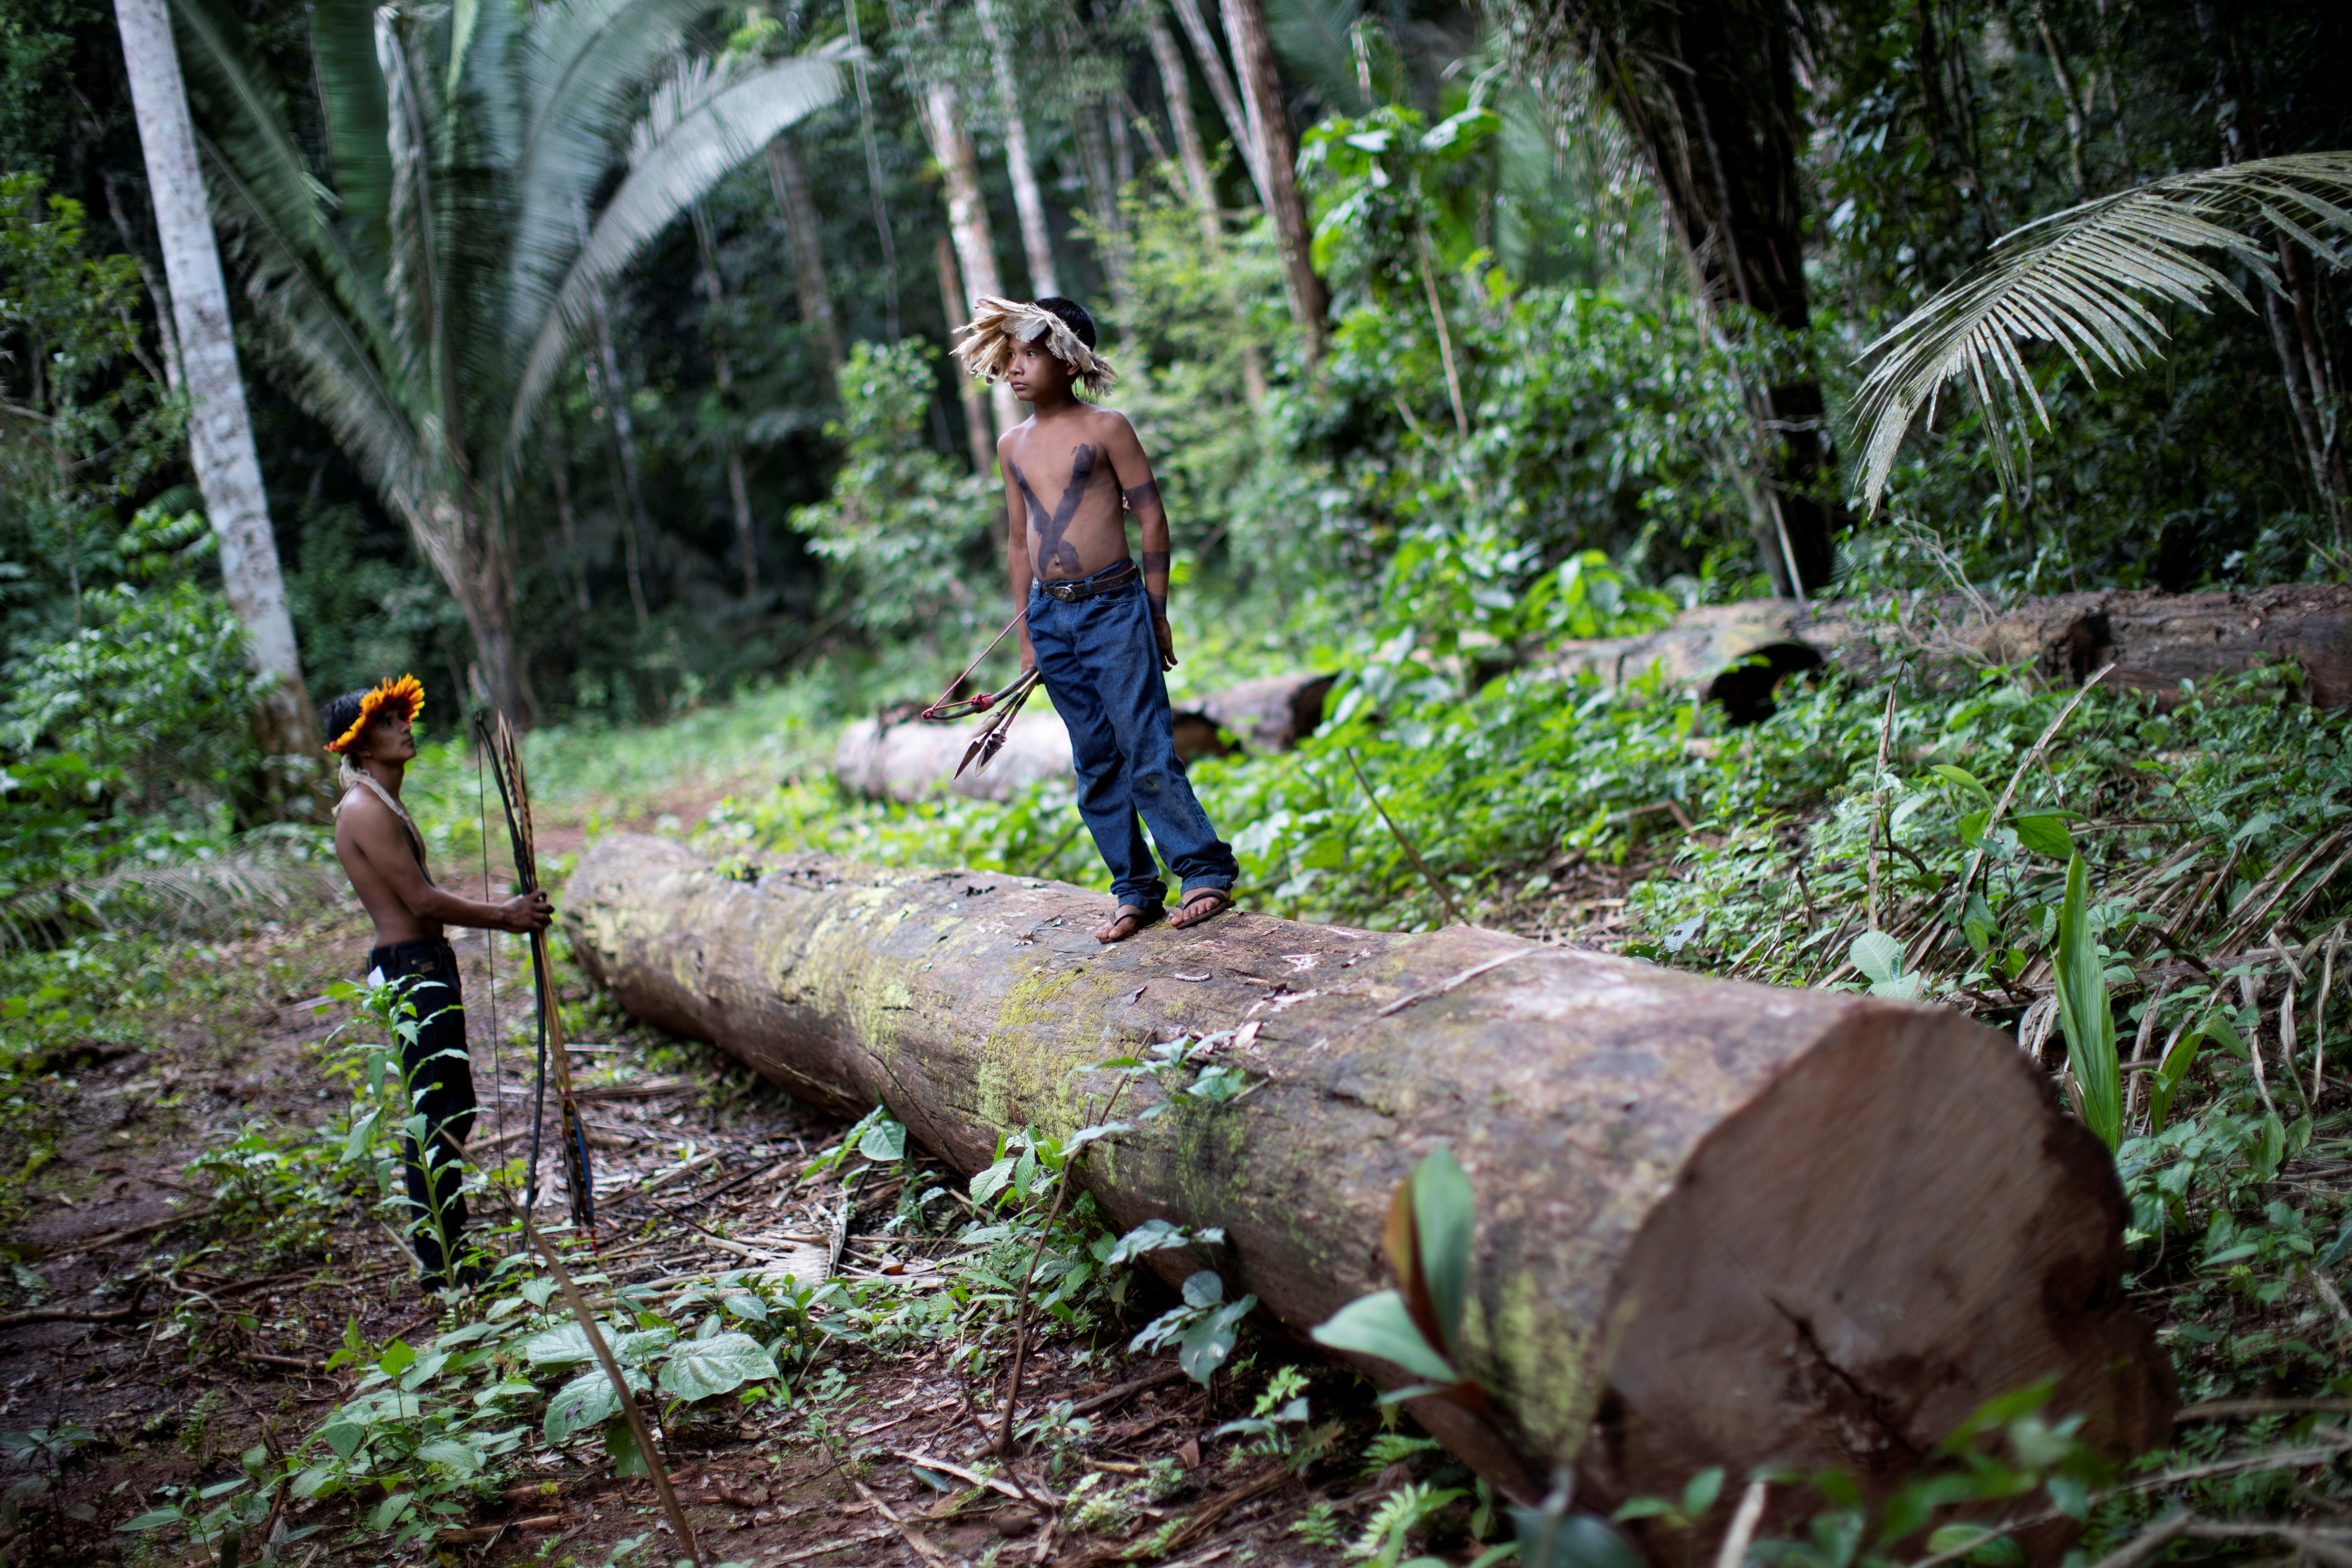 Indigenous men make an inspection an area deforested by invaders, after a meeting was called in the village of Alto Jamari to face the threat of armed land grabbers invading the Uru-eu-wau-wau Indigenous Reservation near Campo Novo de Rondonia